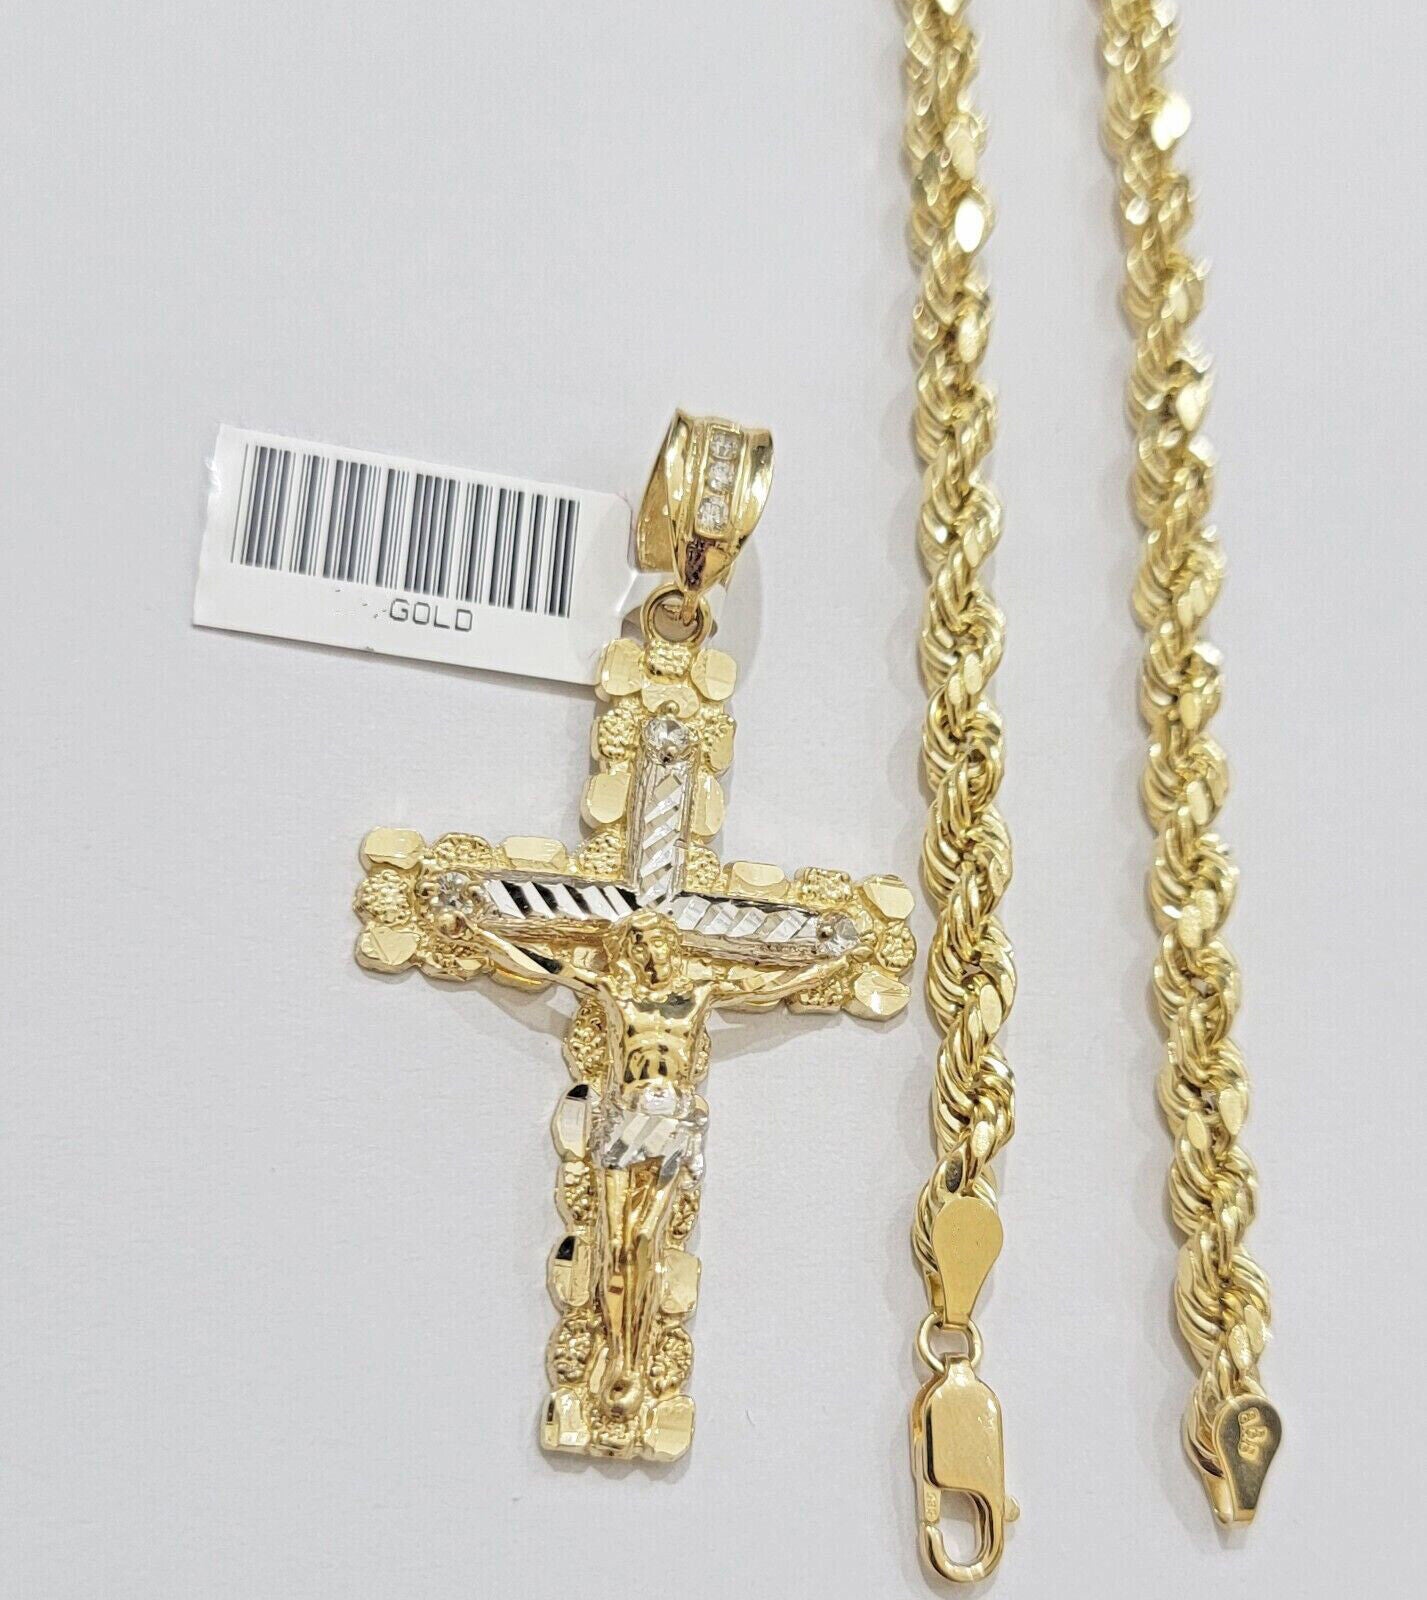 Real 10k Gold Rope Chain With Cross Charm Pendant Set 26 inch 4mm Necklace Men's